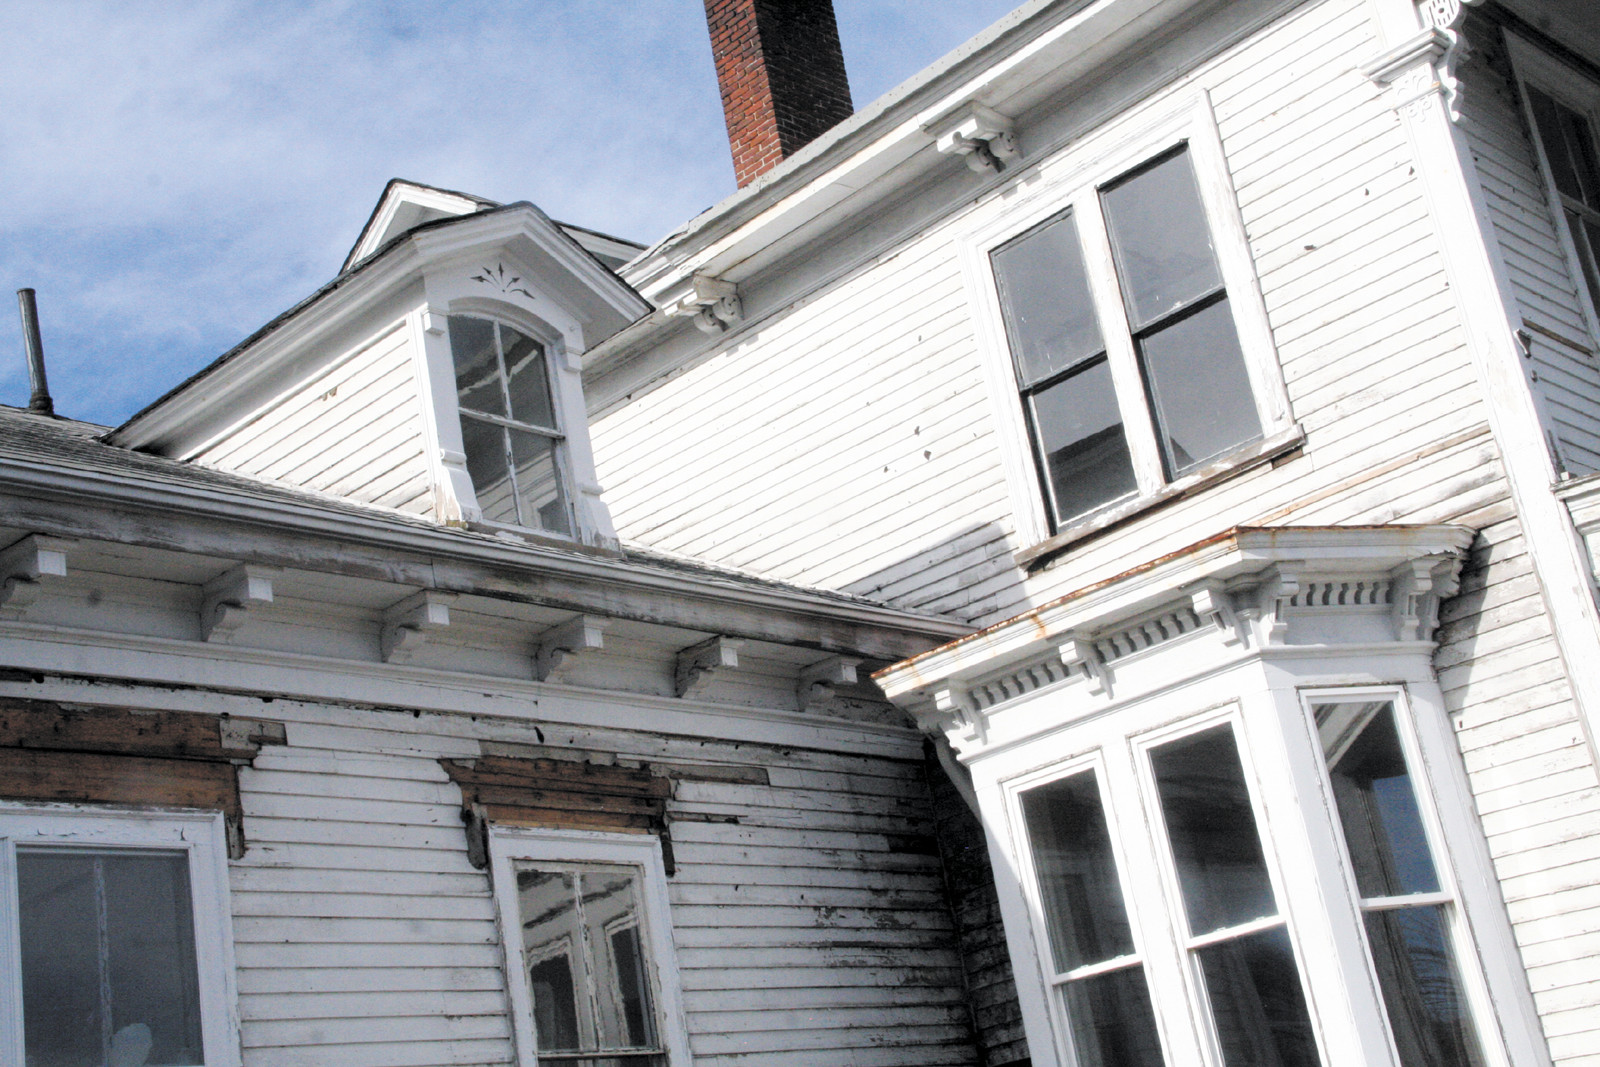 IT ALL GETS SAVED: Decorative trim, chimneys and even copper roofs will all be preserved as part of the restoration work being done to the Fair Street house.